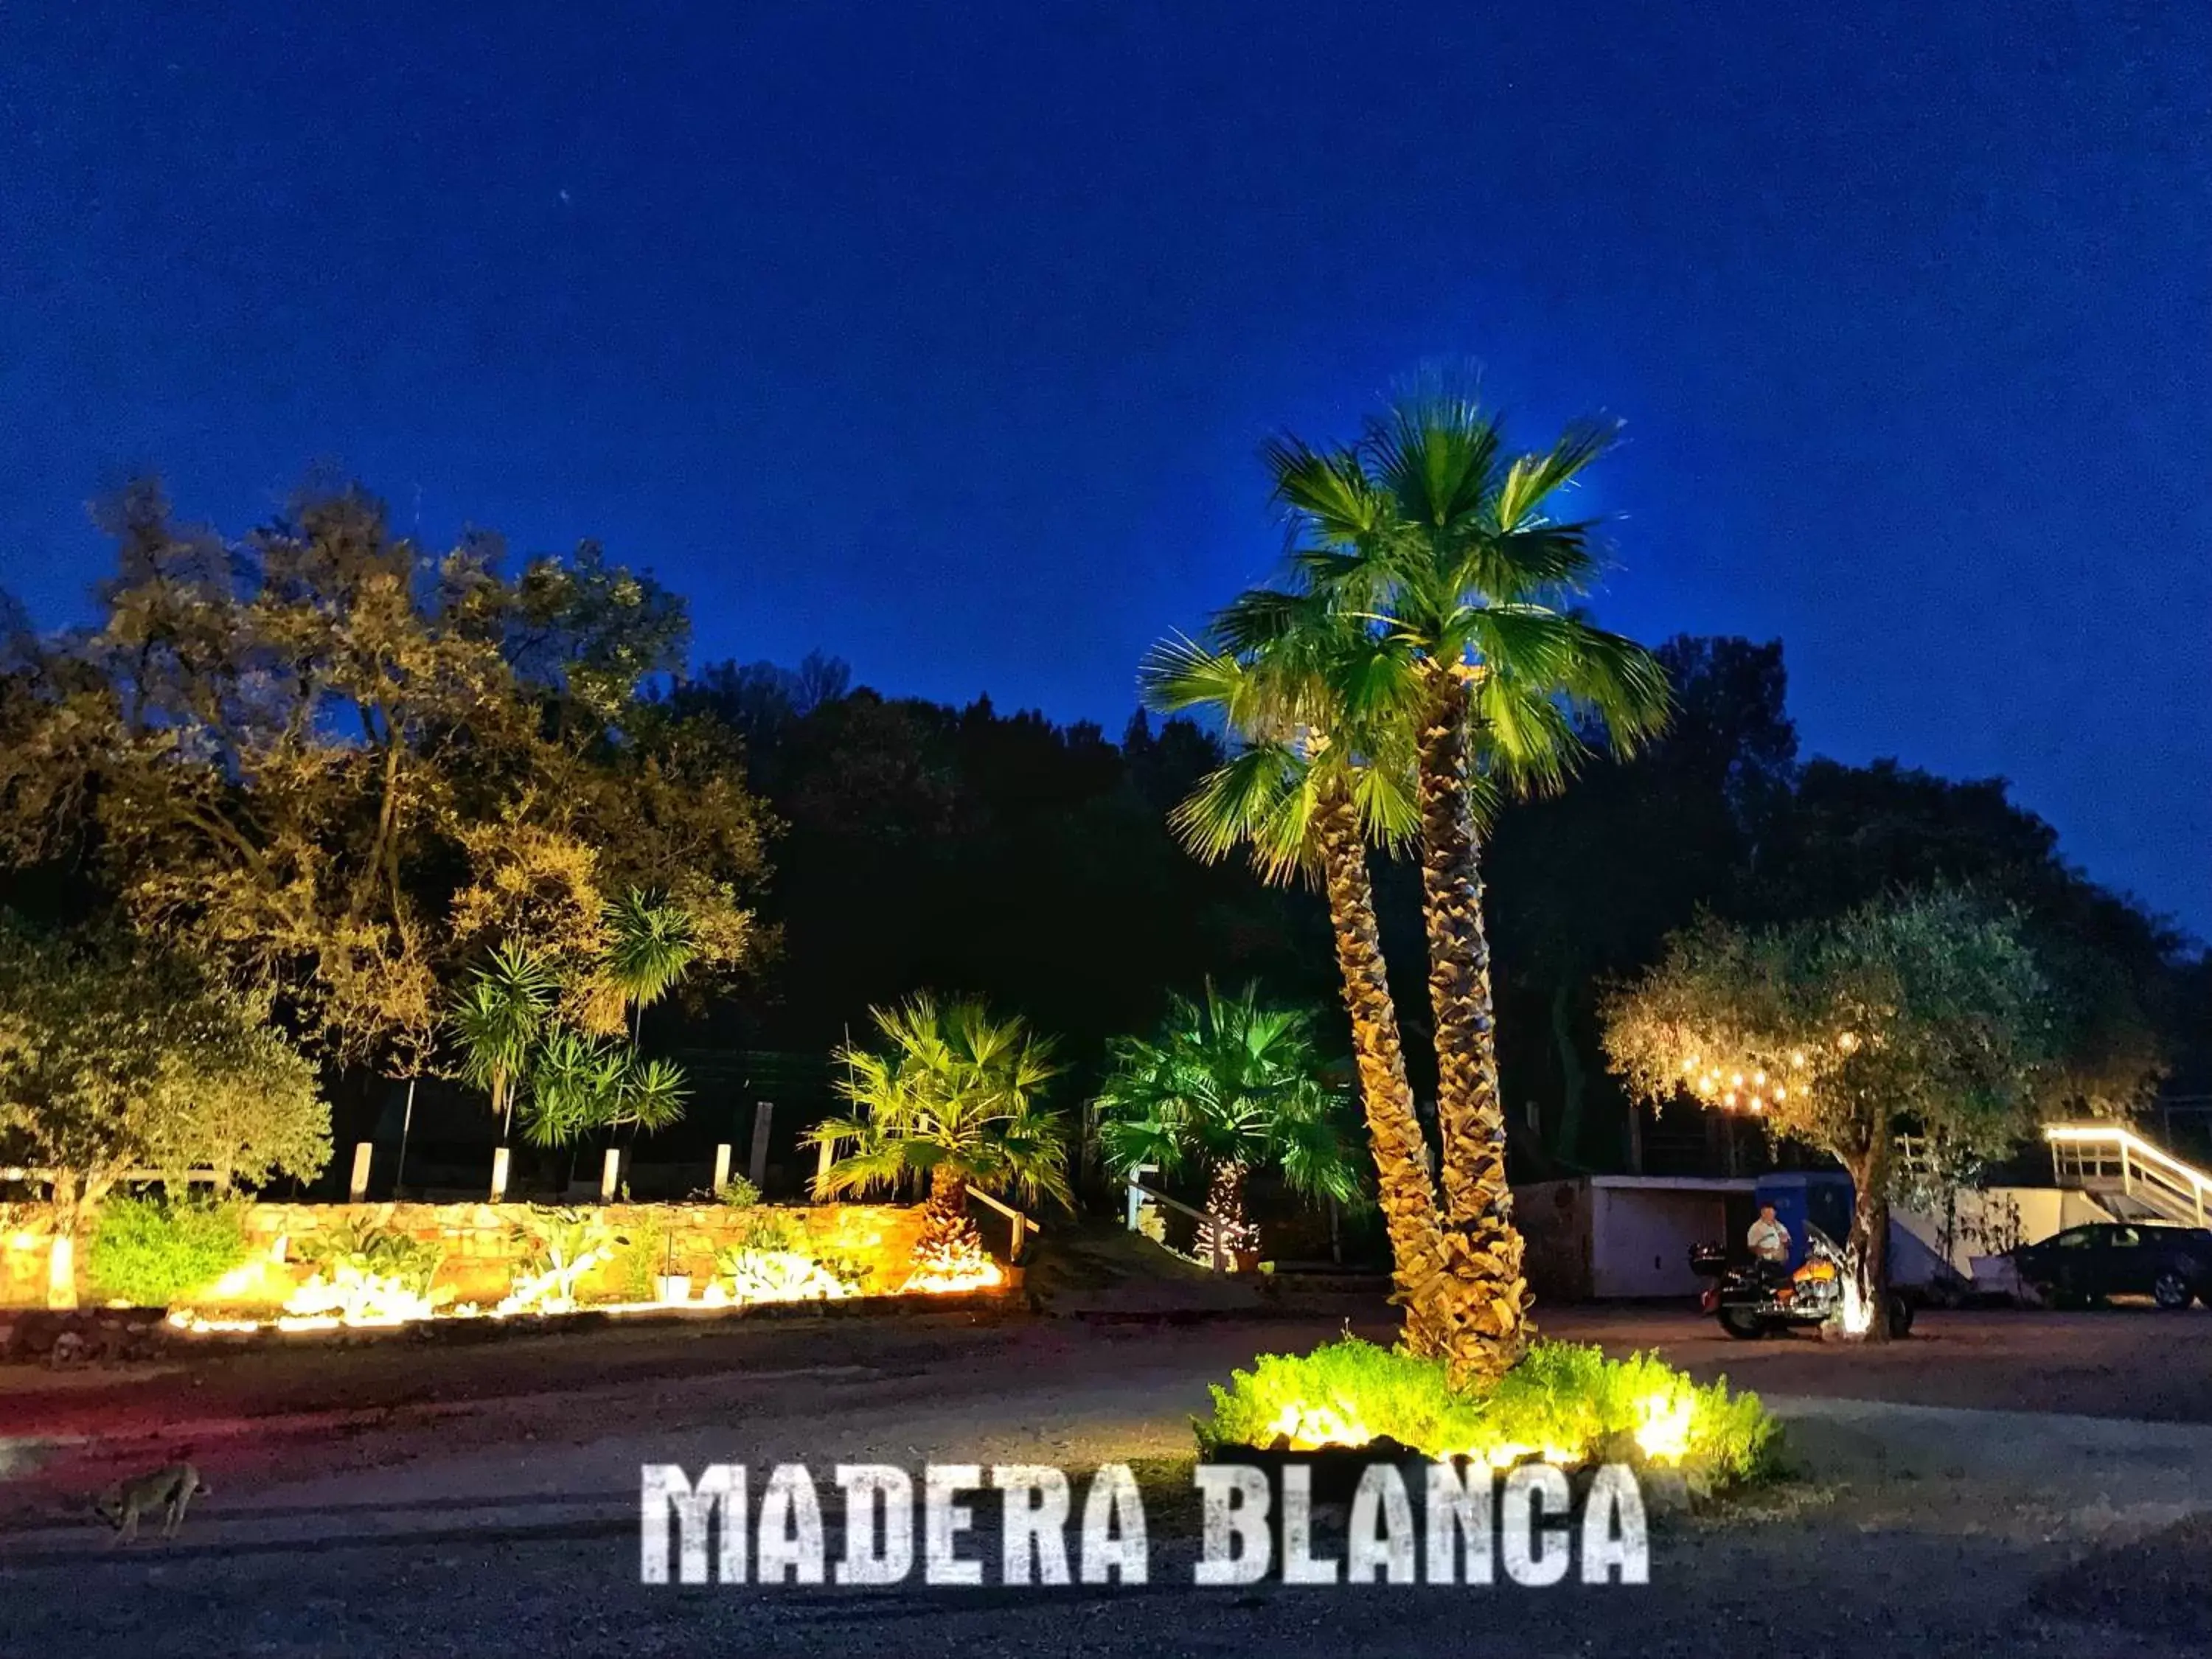 Property Building in Madera Blanca